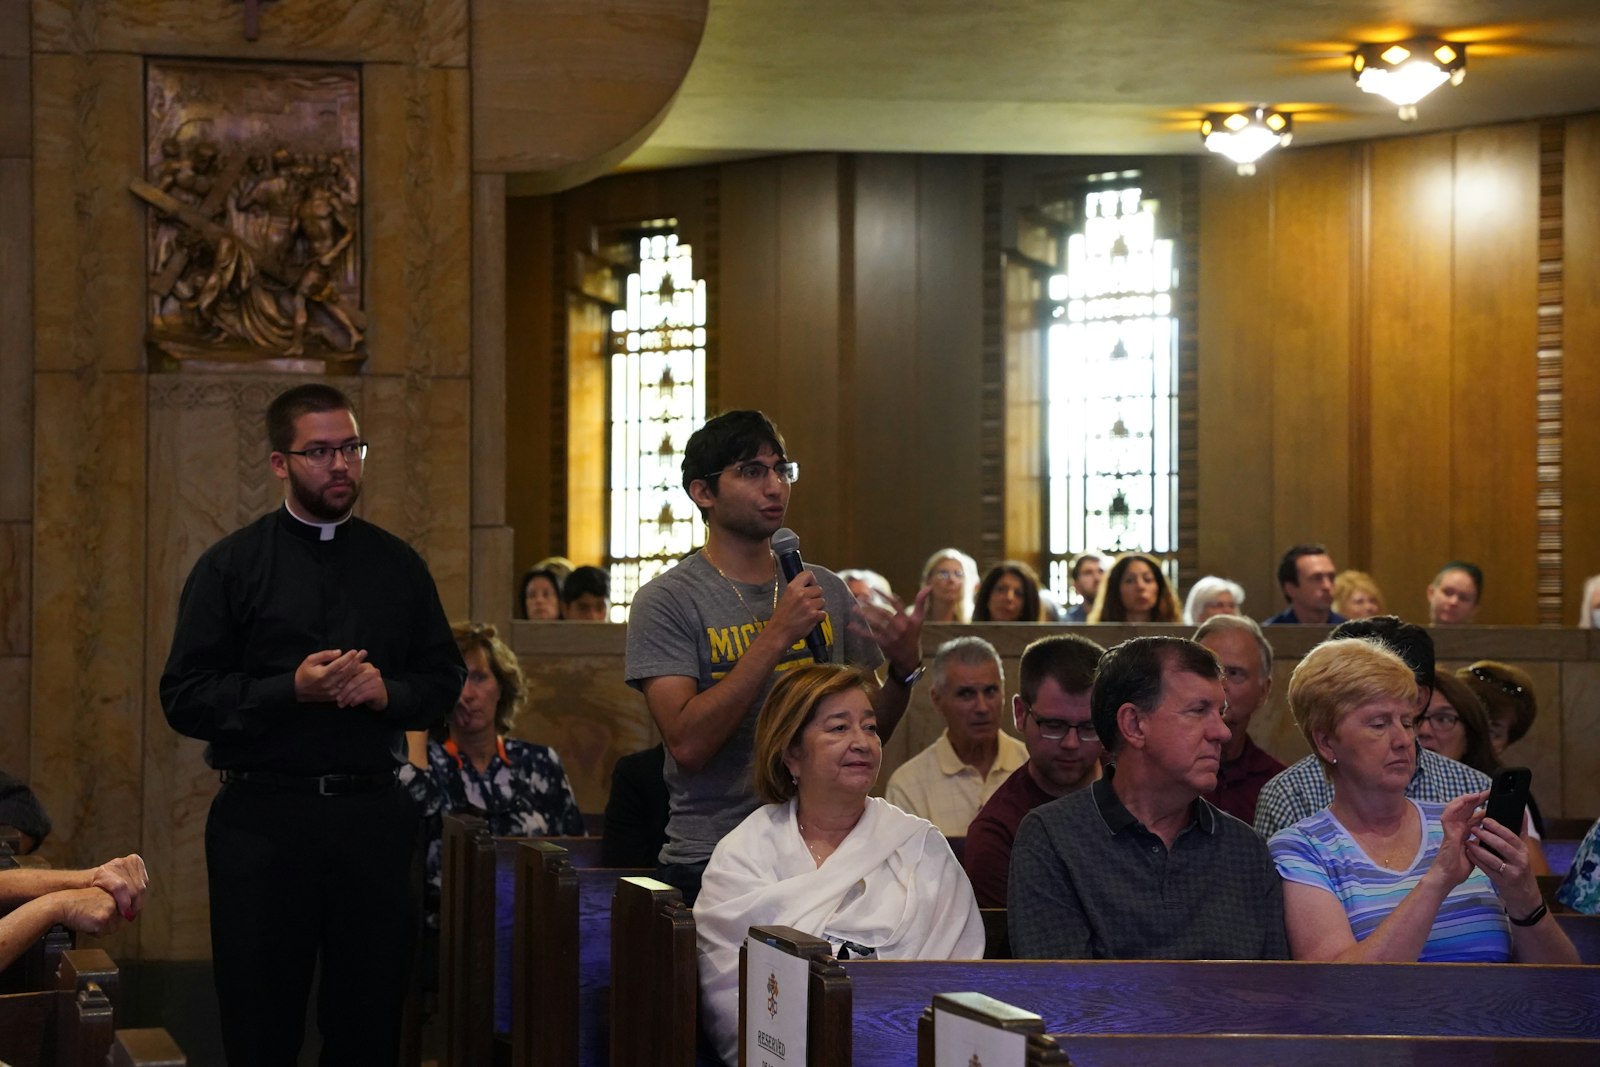 Following Bishop Barron’s keynote address, audience members asked Bishop Barron questions on St. Therese of Lisieux, Word on Fire, the “Little Way” and St. Therese’s spirituality of the primacy of grace.